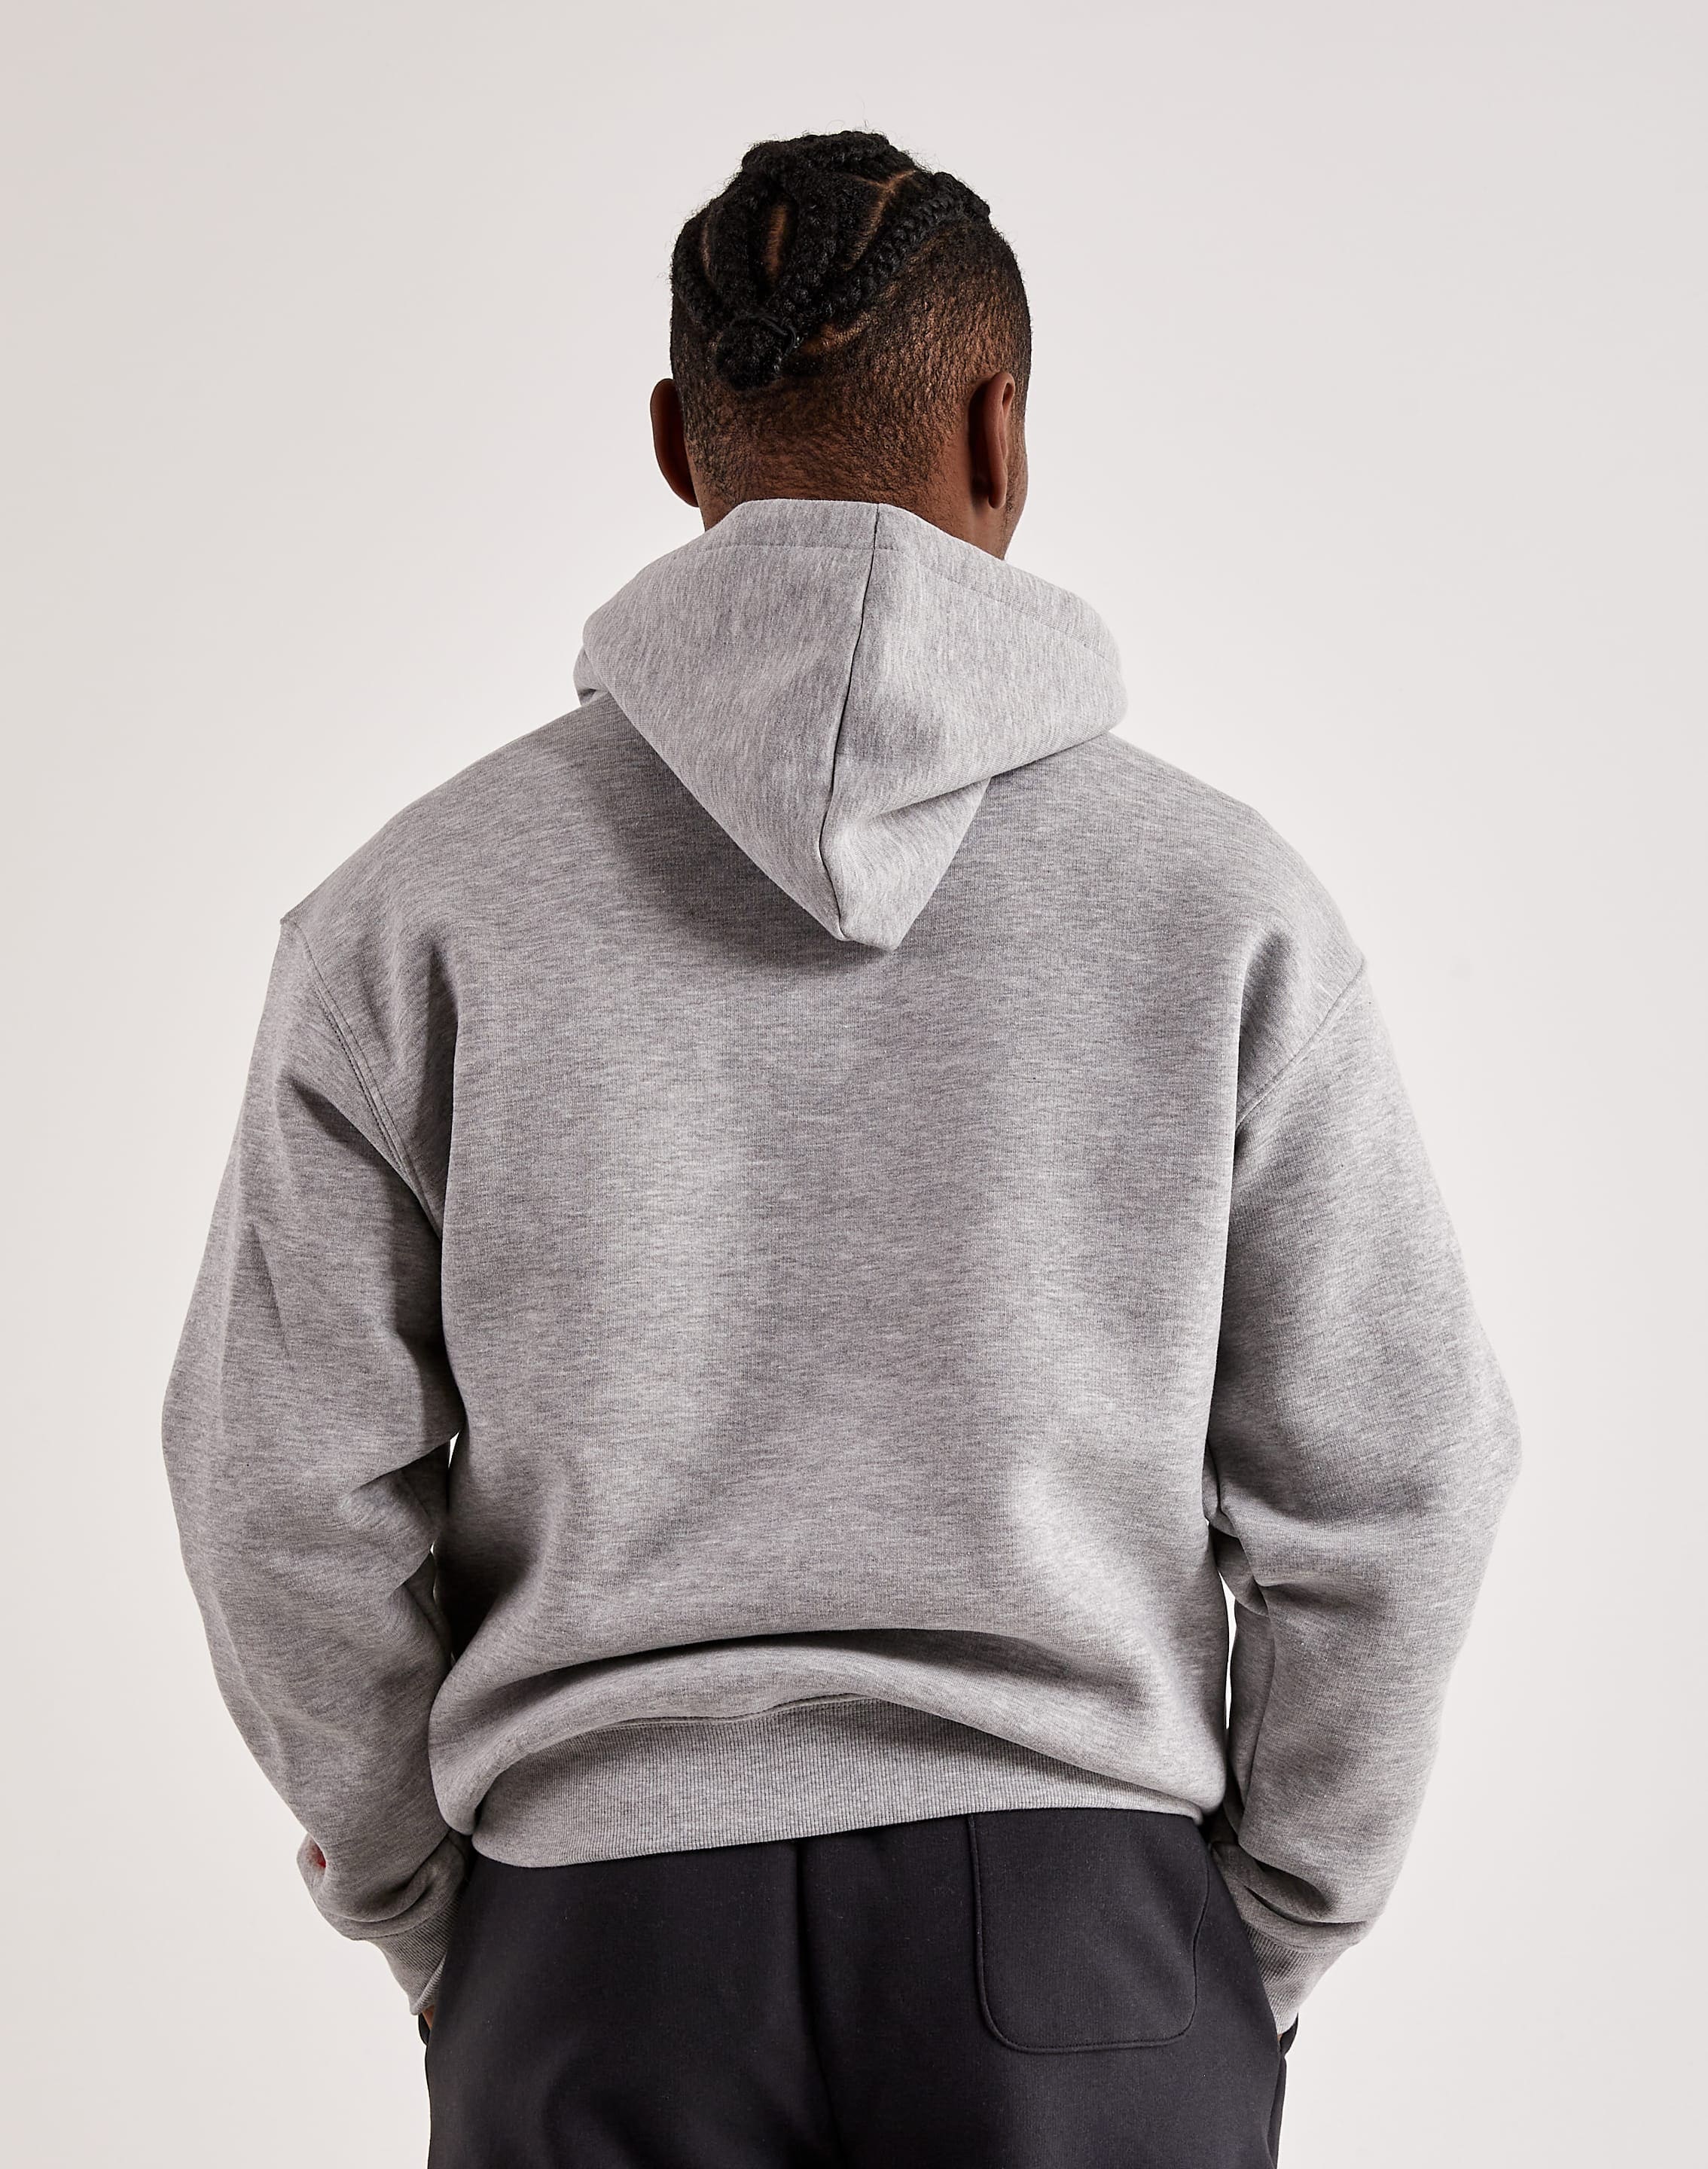 New Balance Flame Pullover Hoodie – DTLR